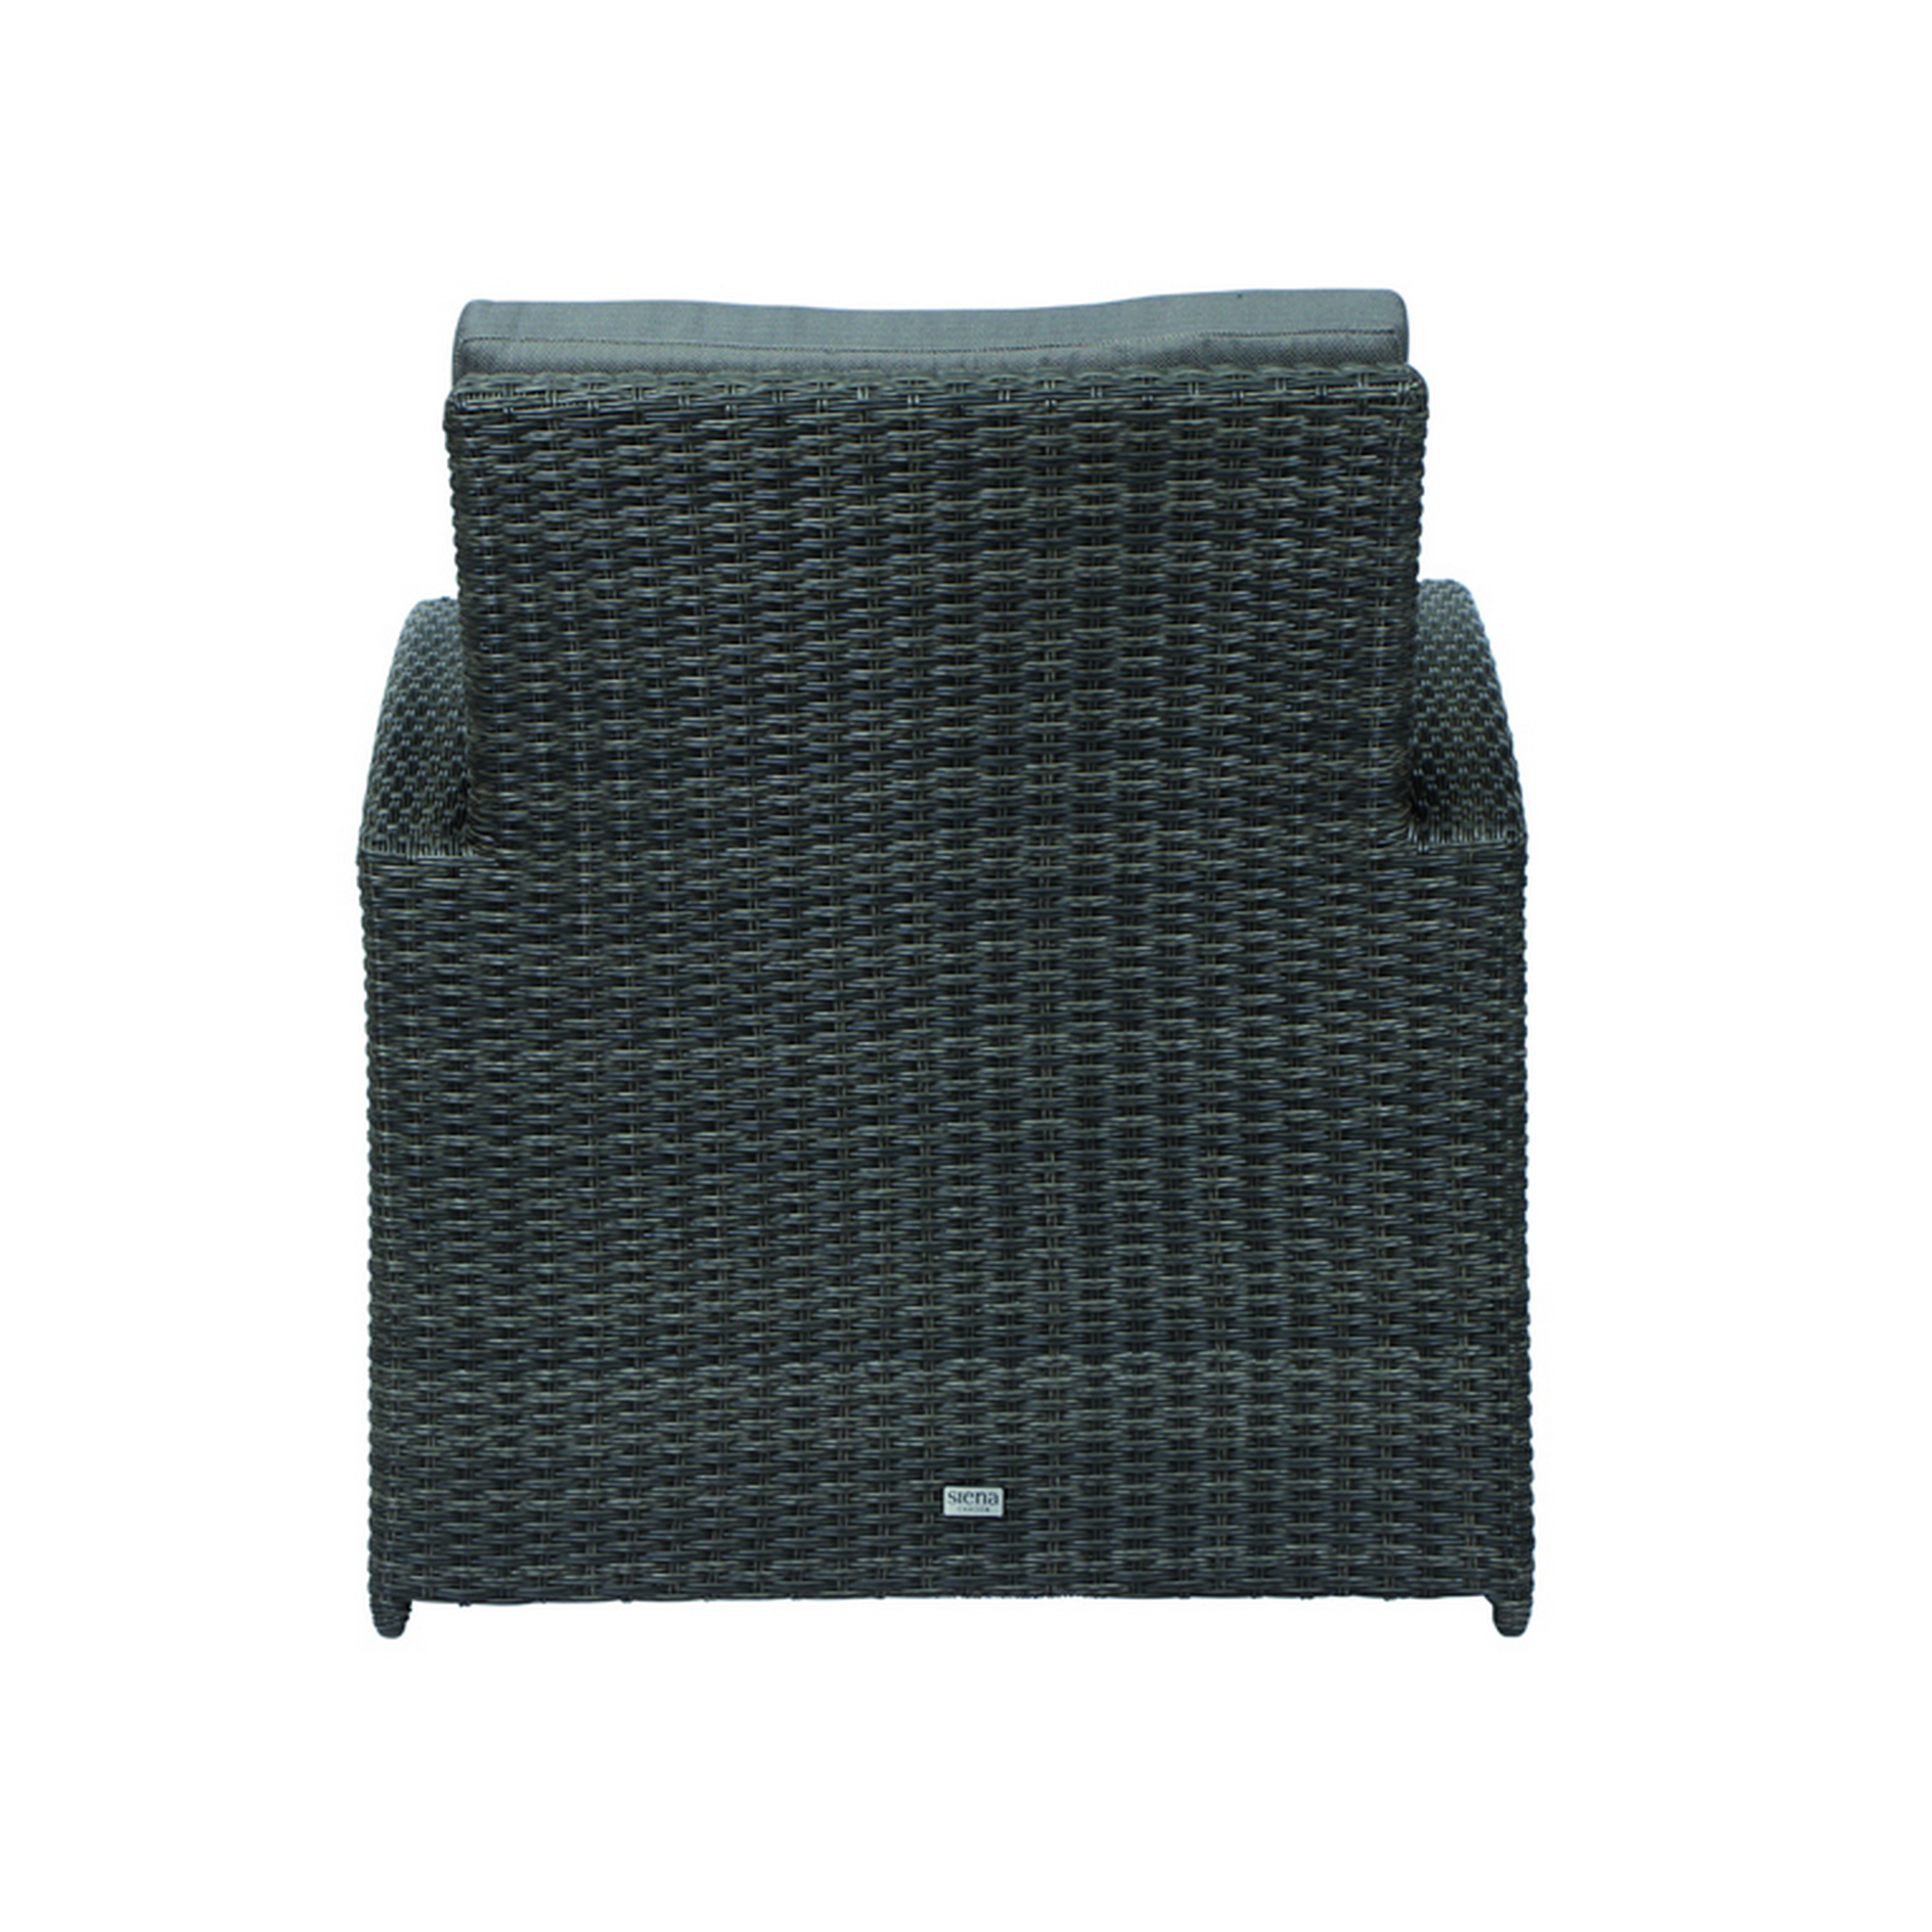 Loungesessel 'Porto' grau 80 x 89 x 79 cm + product picture